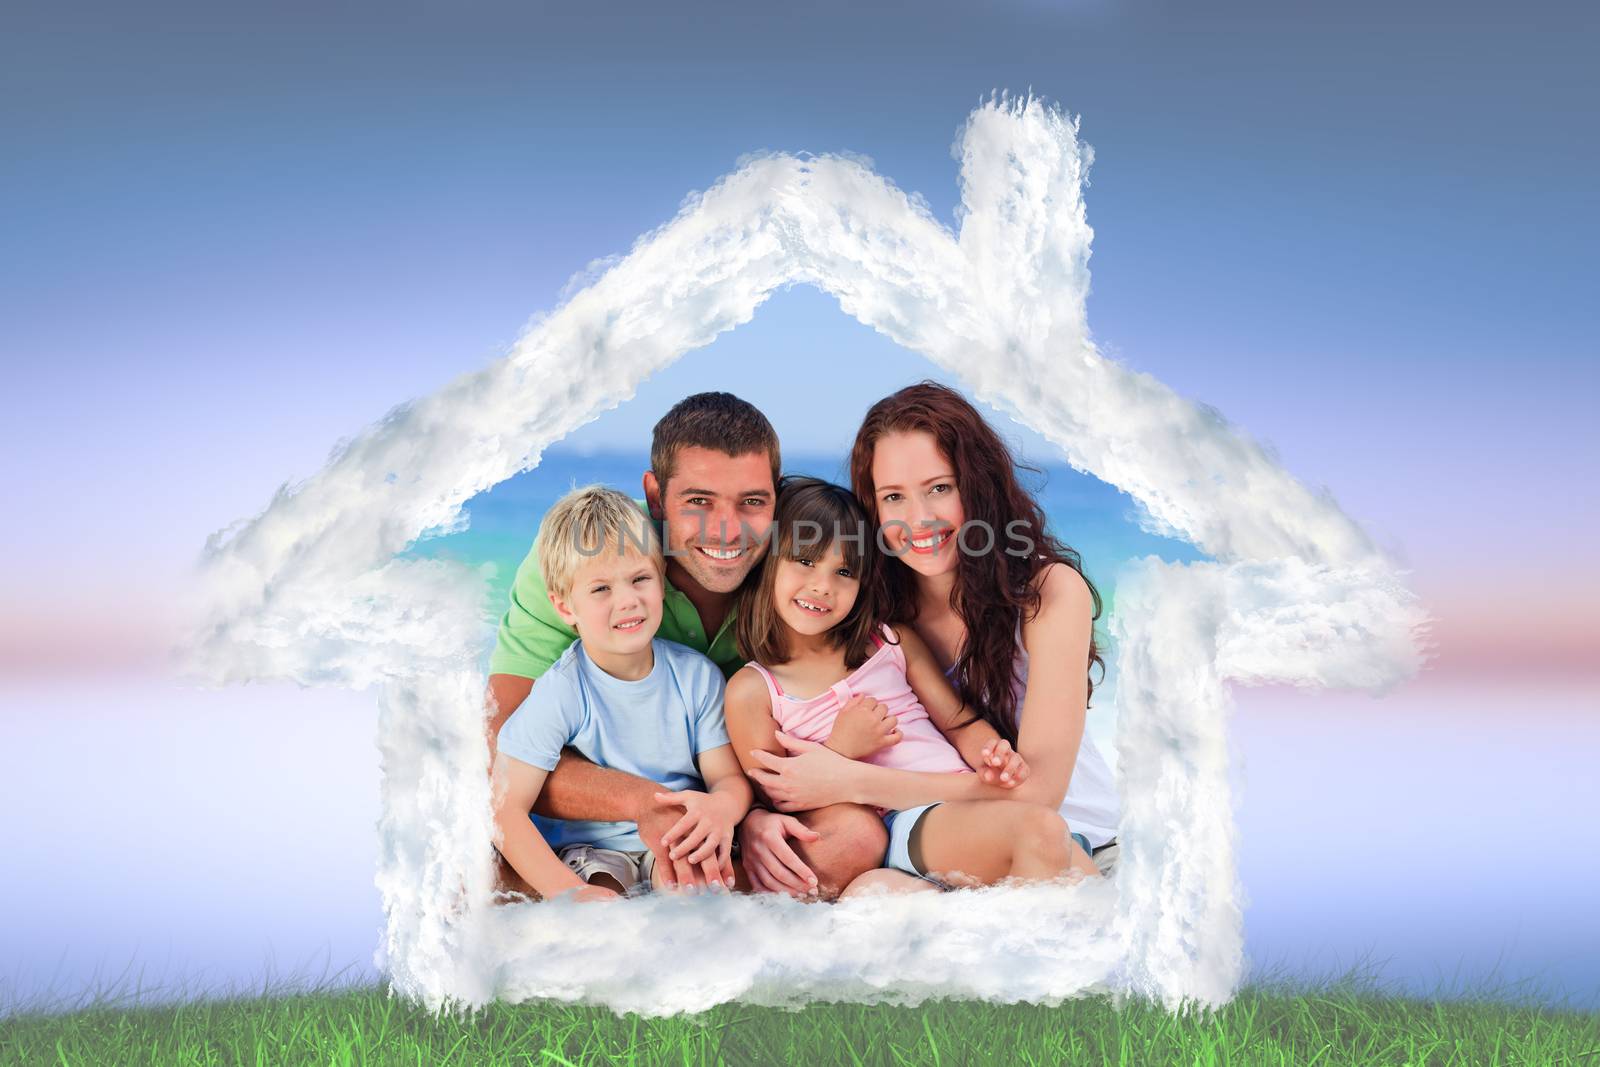 Portrait of a family at the beach against green grass under blue and purple sky